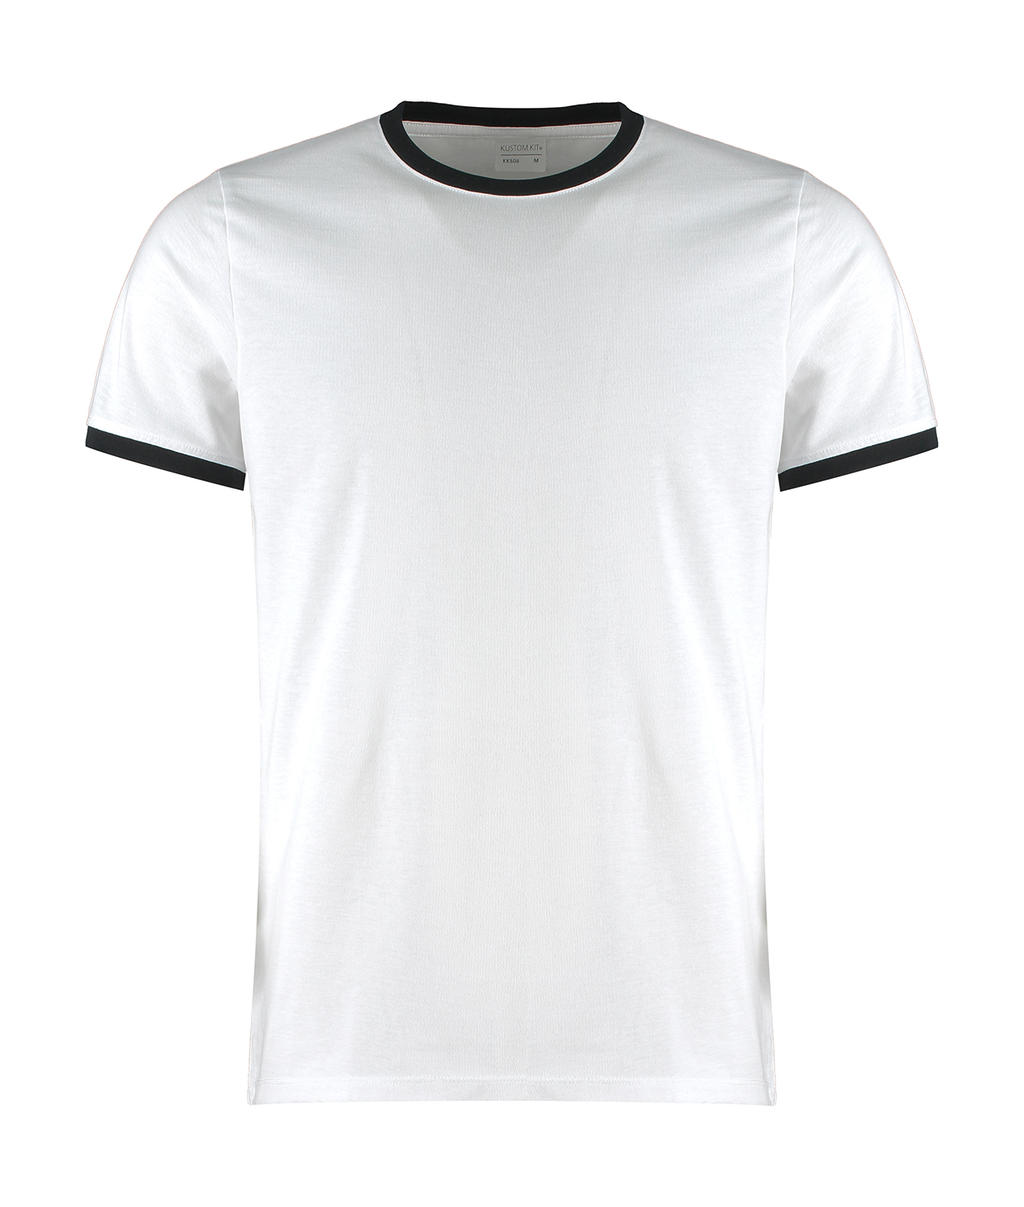  Fashion Fit Ringer Tee in Farbe White/Black